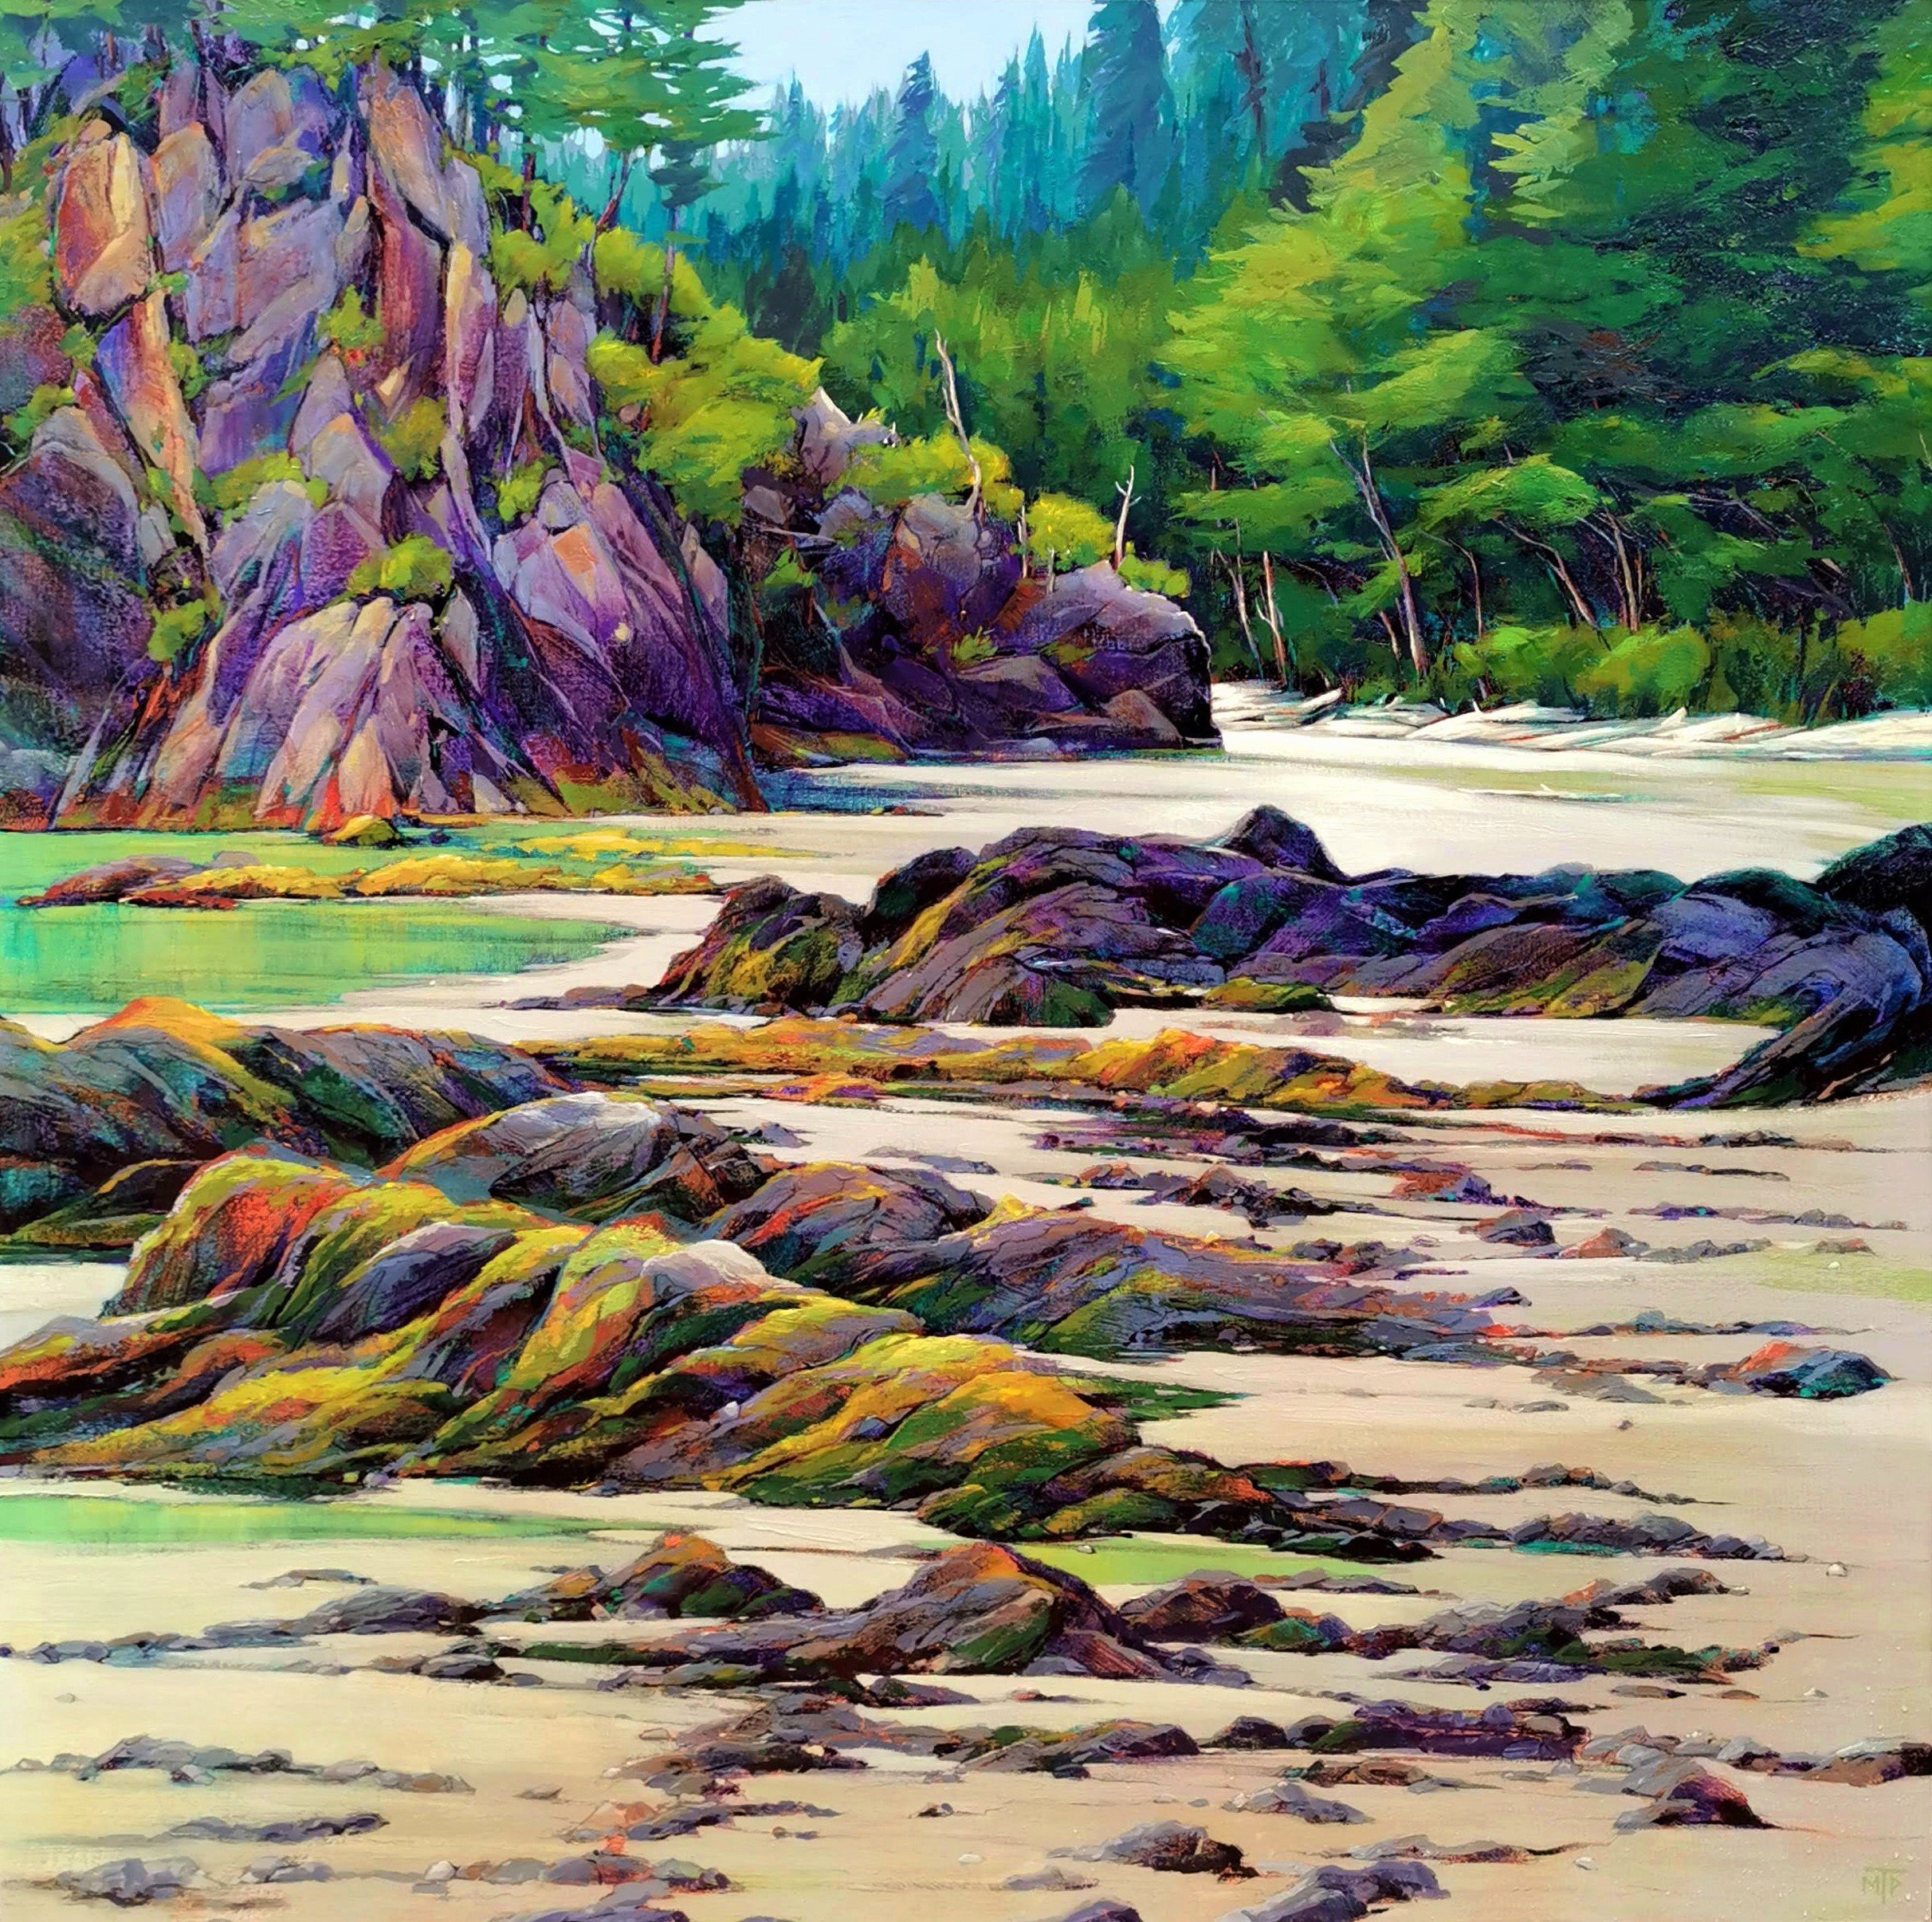  Low Tide at Brady’s Beach    Acrylic on canvas, 48x48 inches, $6,500  